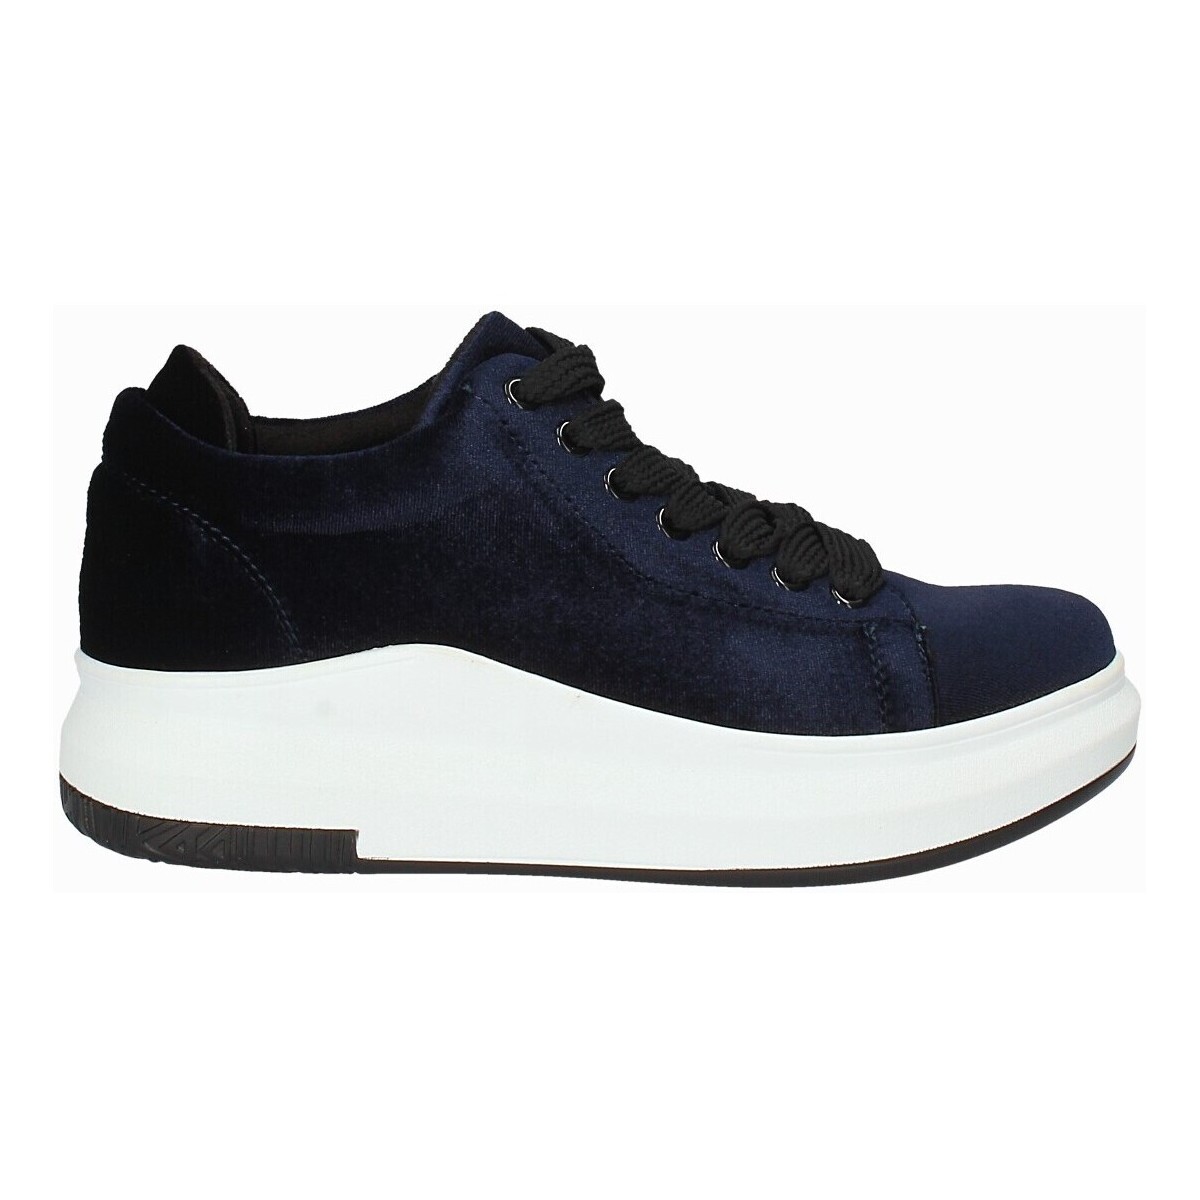 Xαμηλά Sneakers Exé Shoes F17006688206